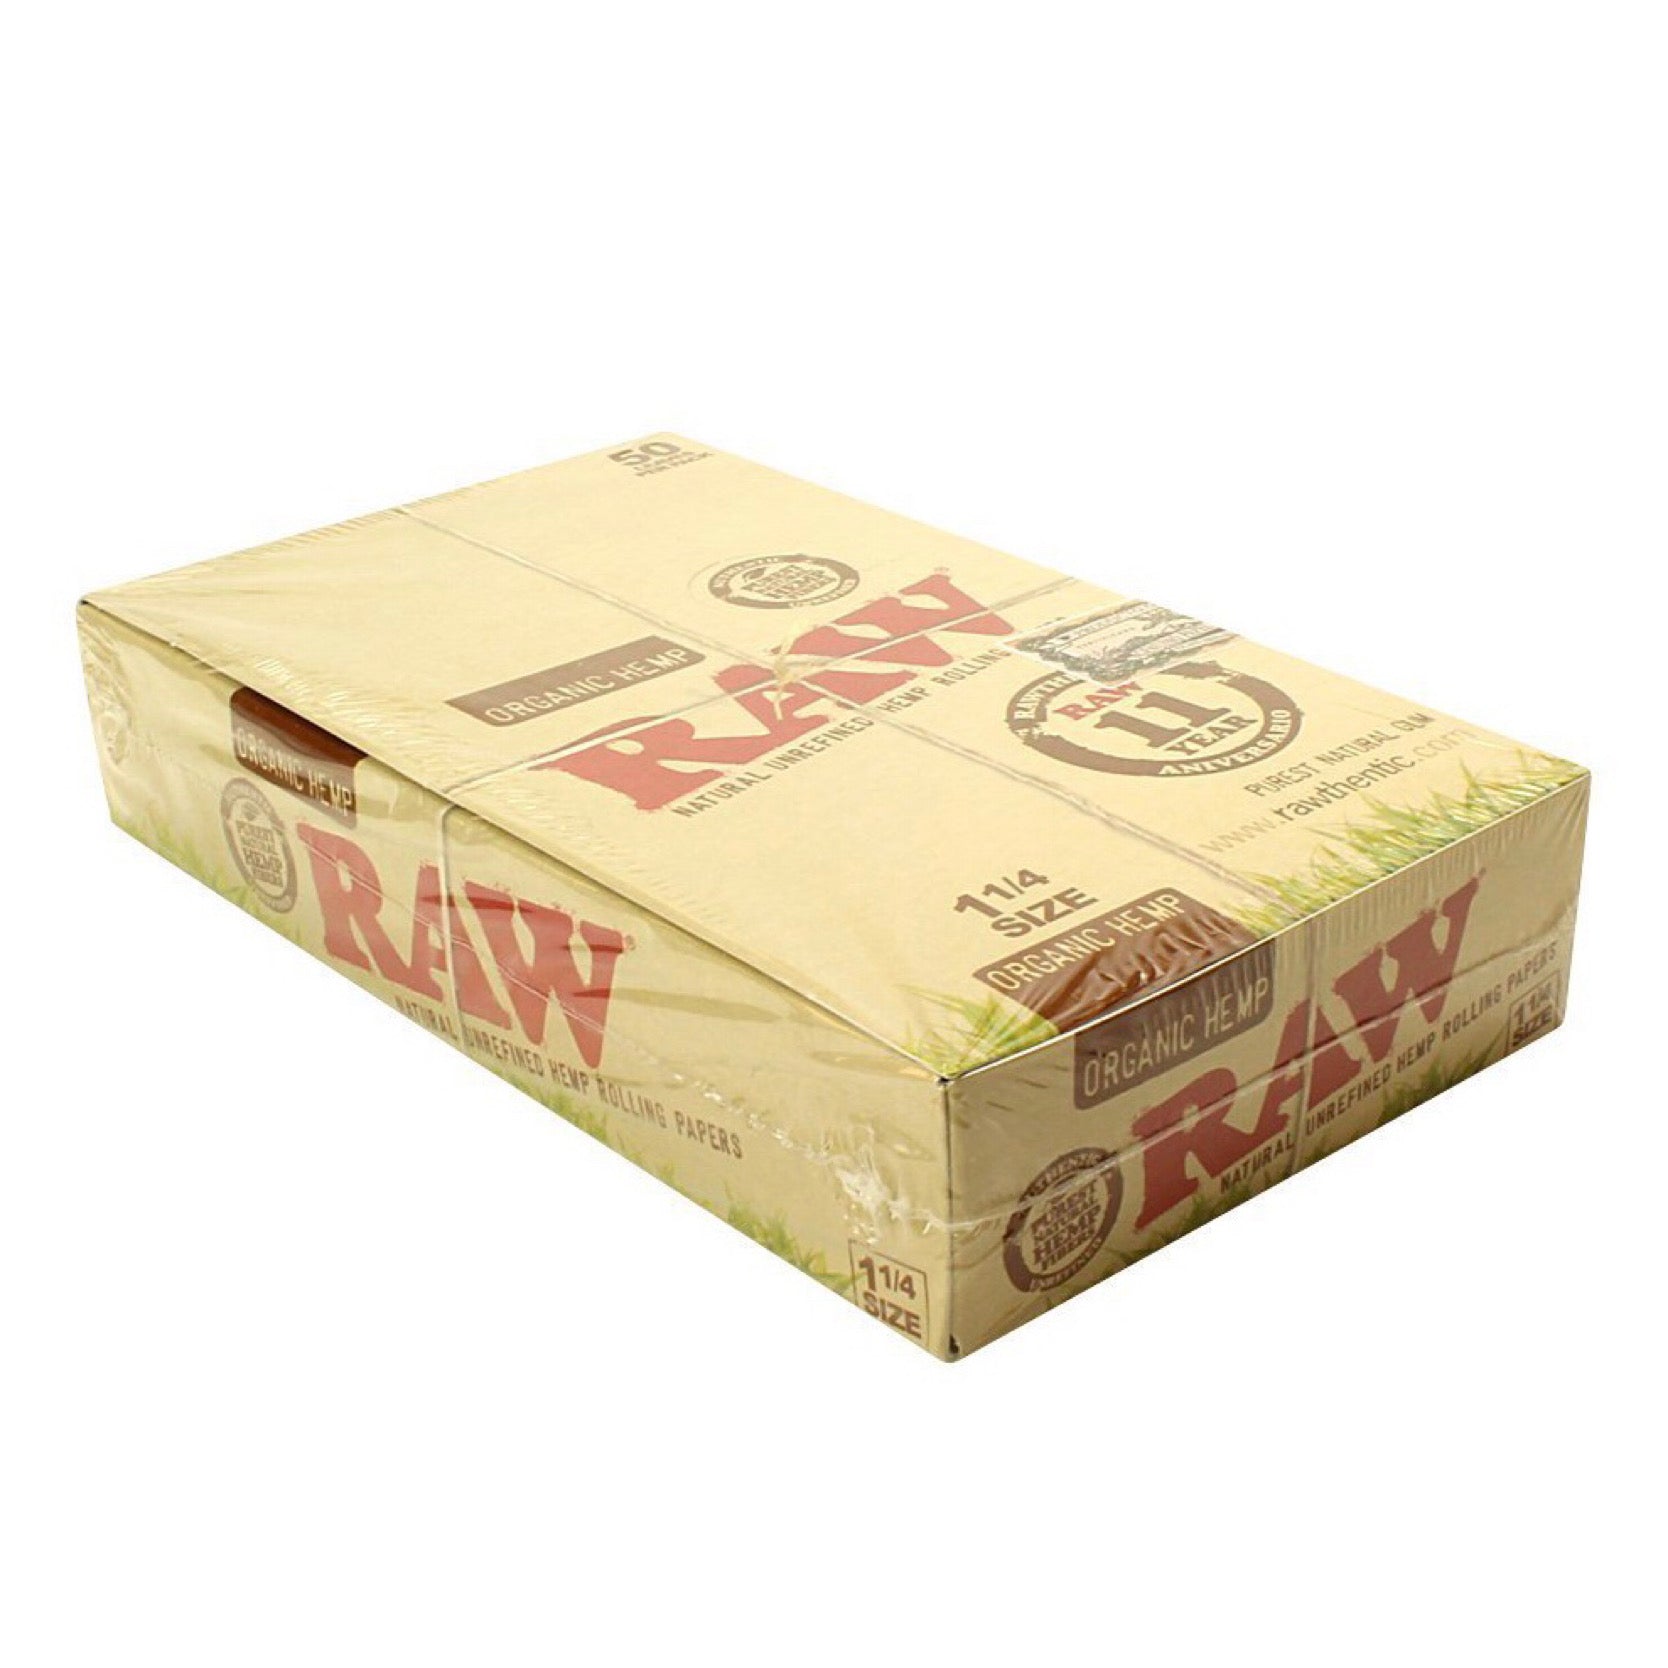 Raw® Organic Hemp 1.25” Rolling Papers by RAW Rolling Papers | Mission Dispensary